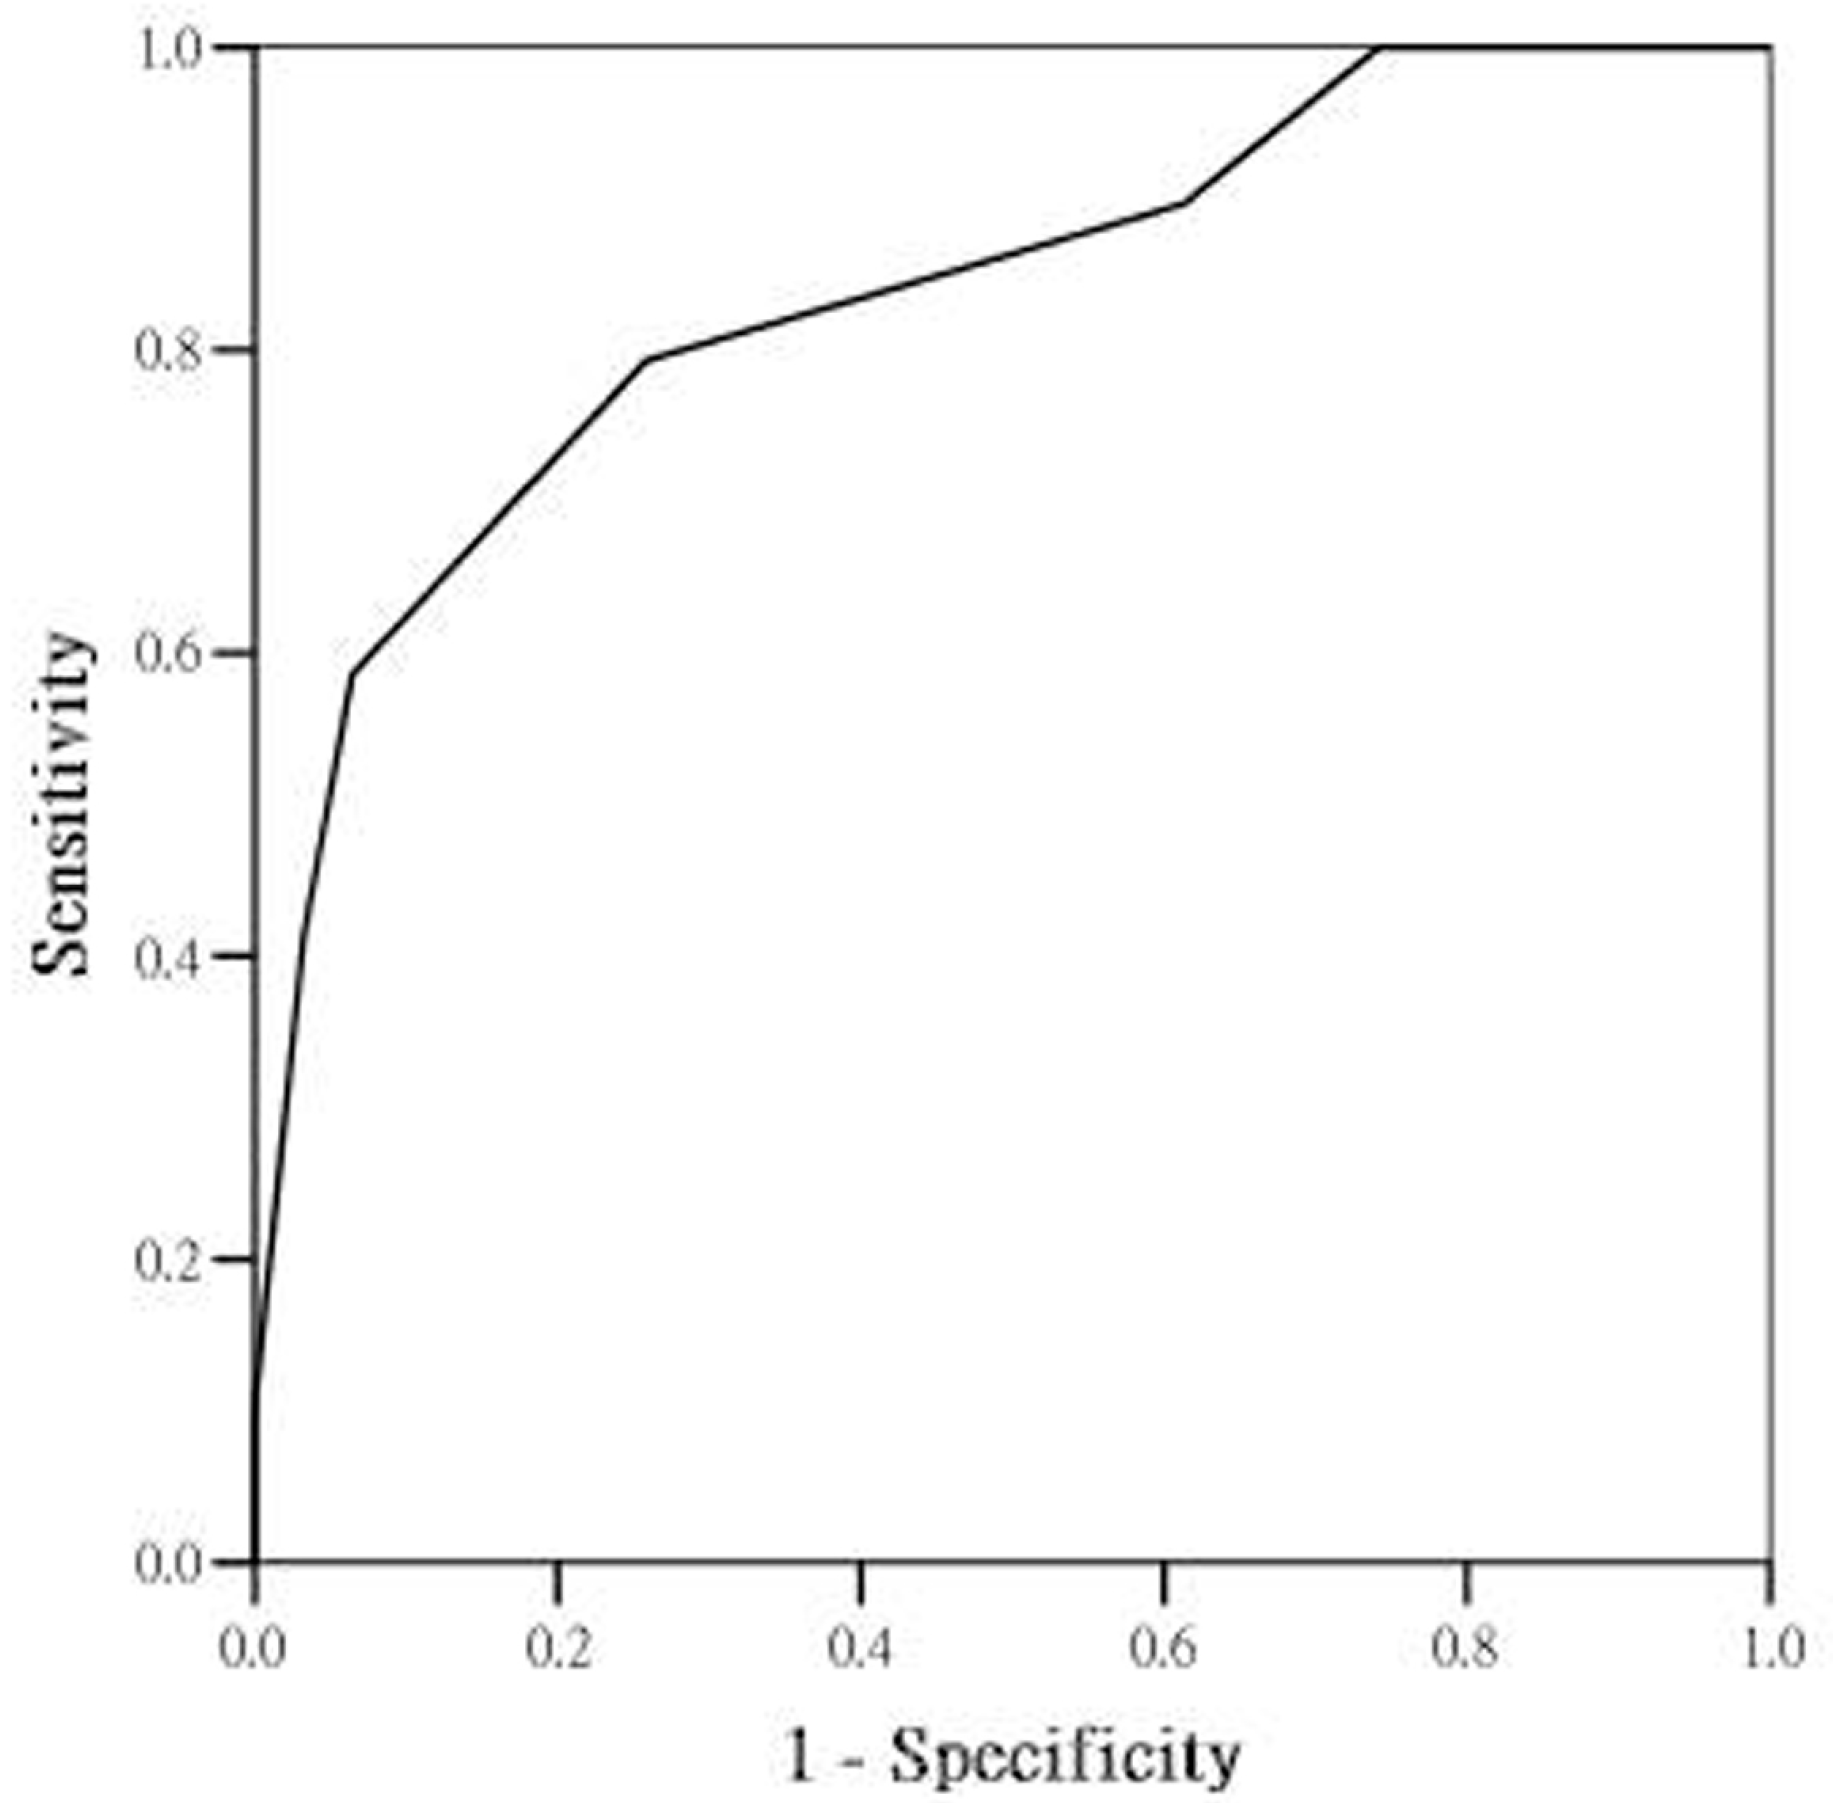 The receiver operator characteristic (ROC) curve of the SASE-CHI